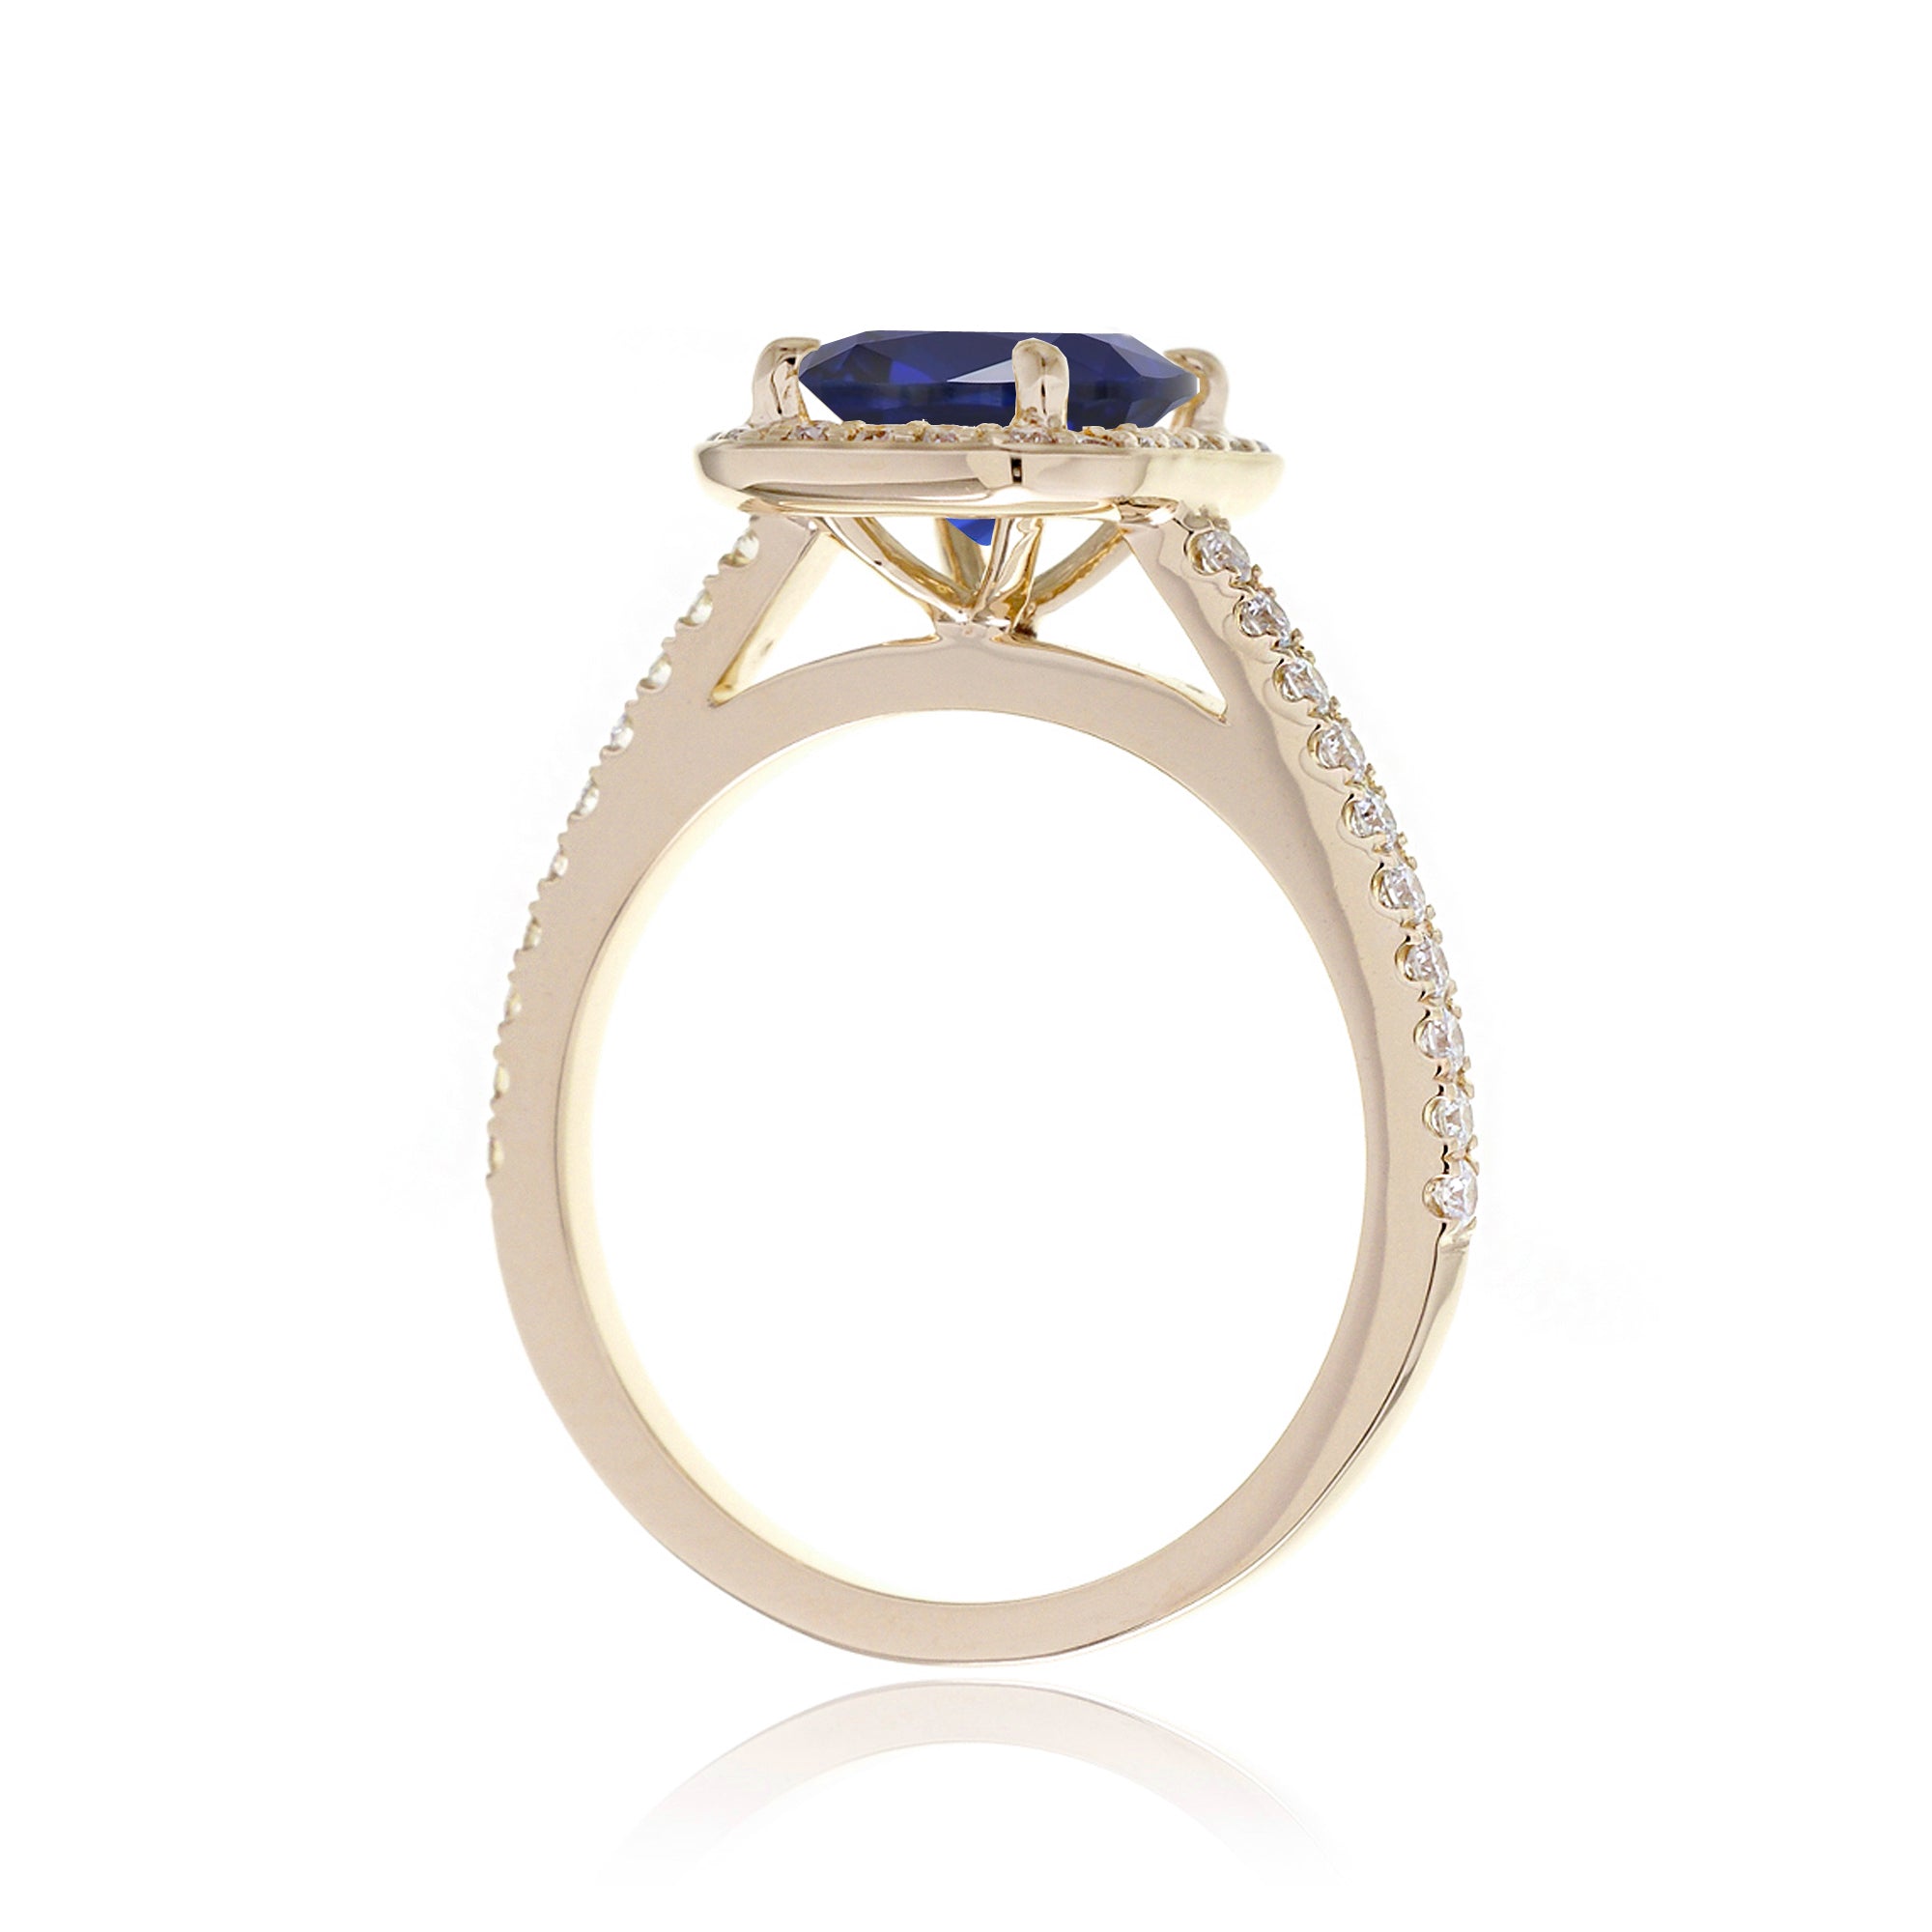 Cushion lab-grown sapphire diamond halo cathedral engagement ring - the Steffy yellow gold